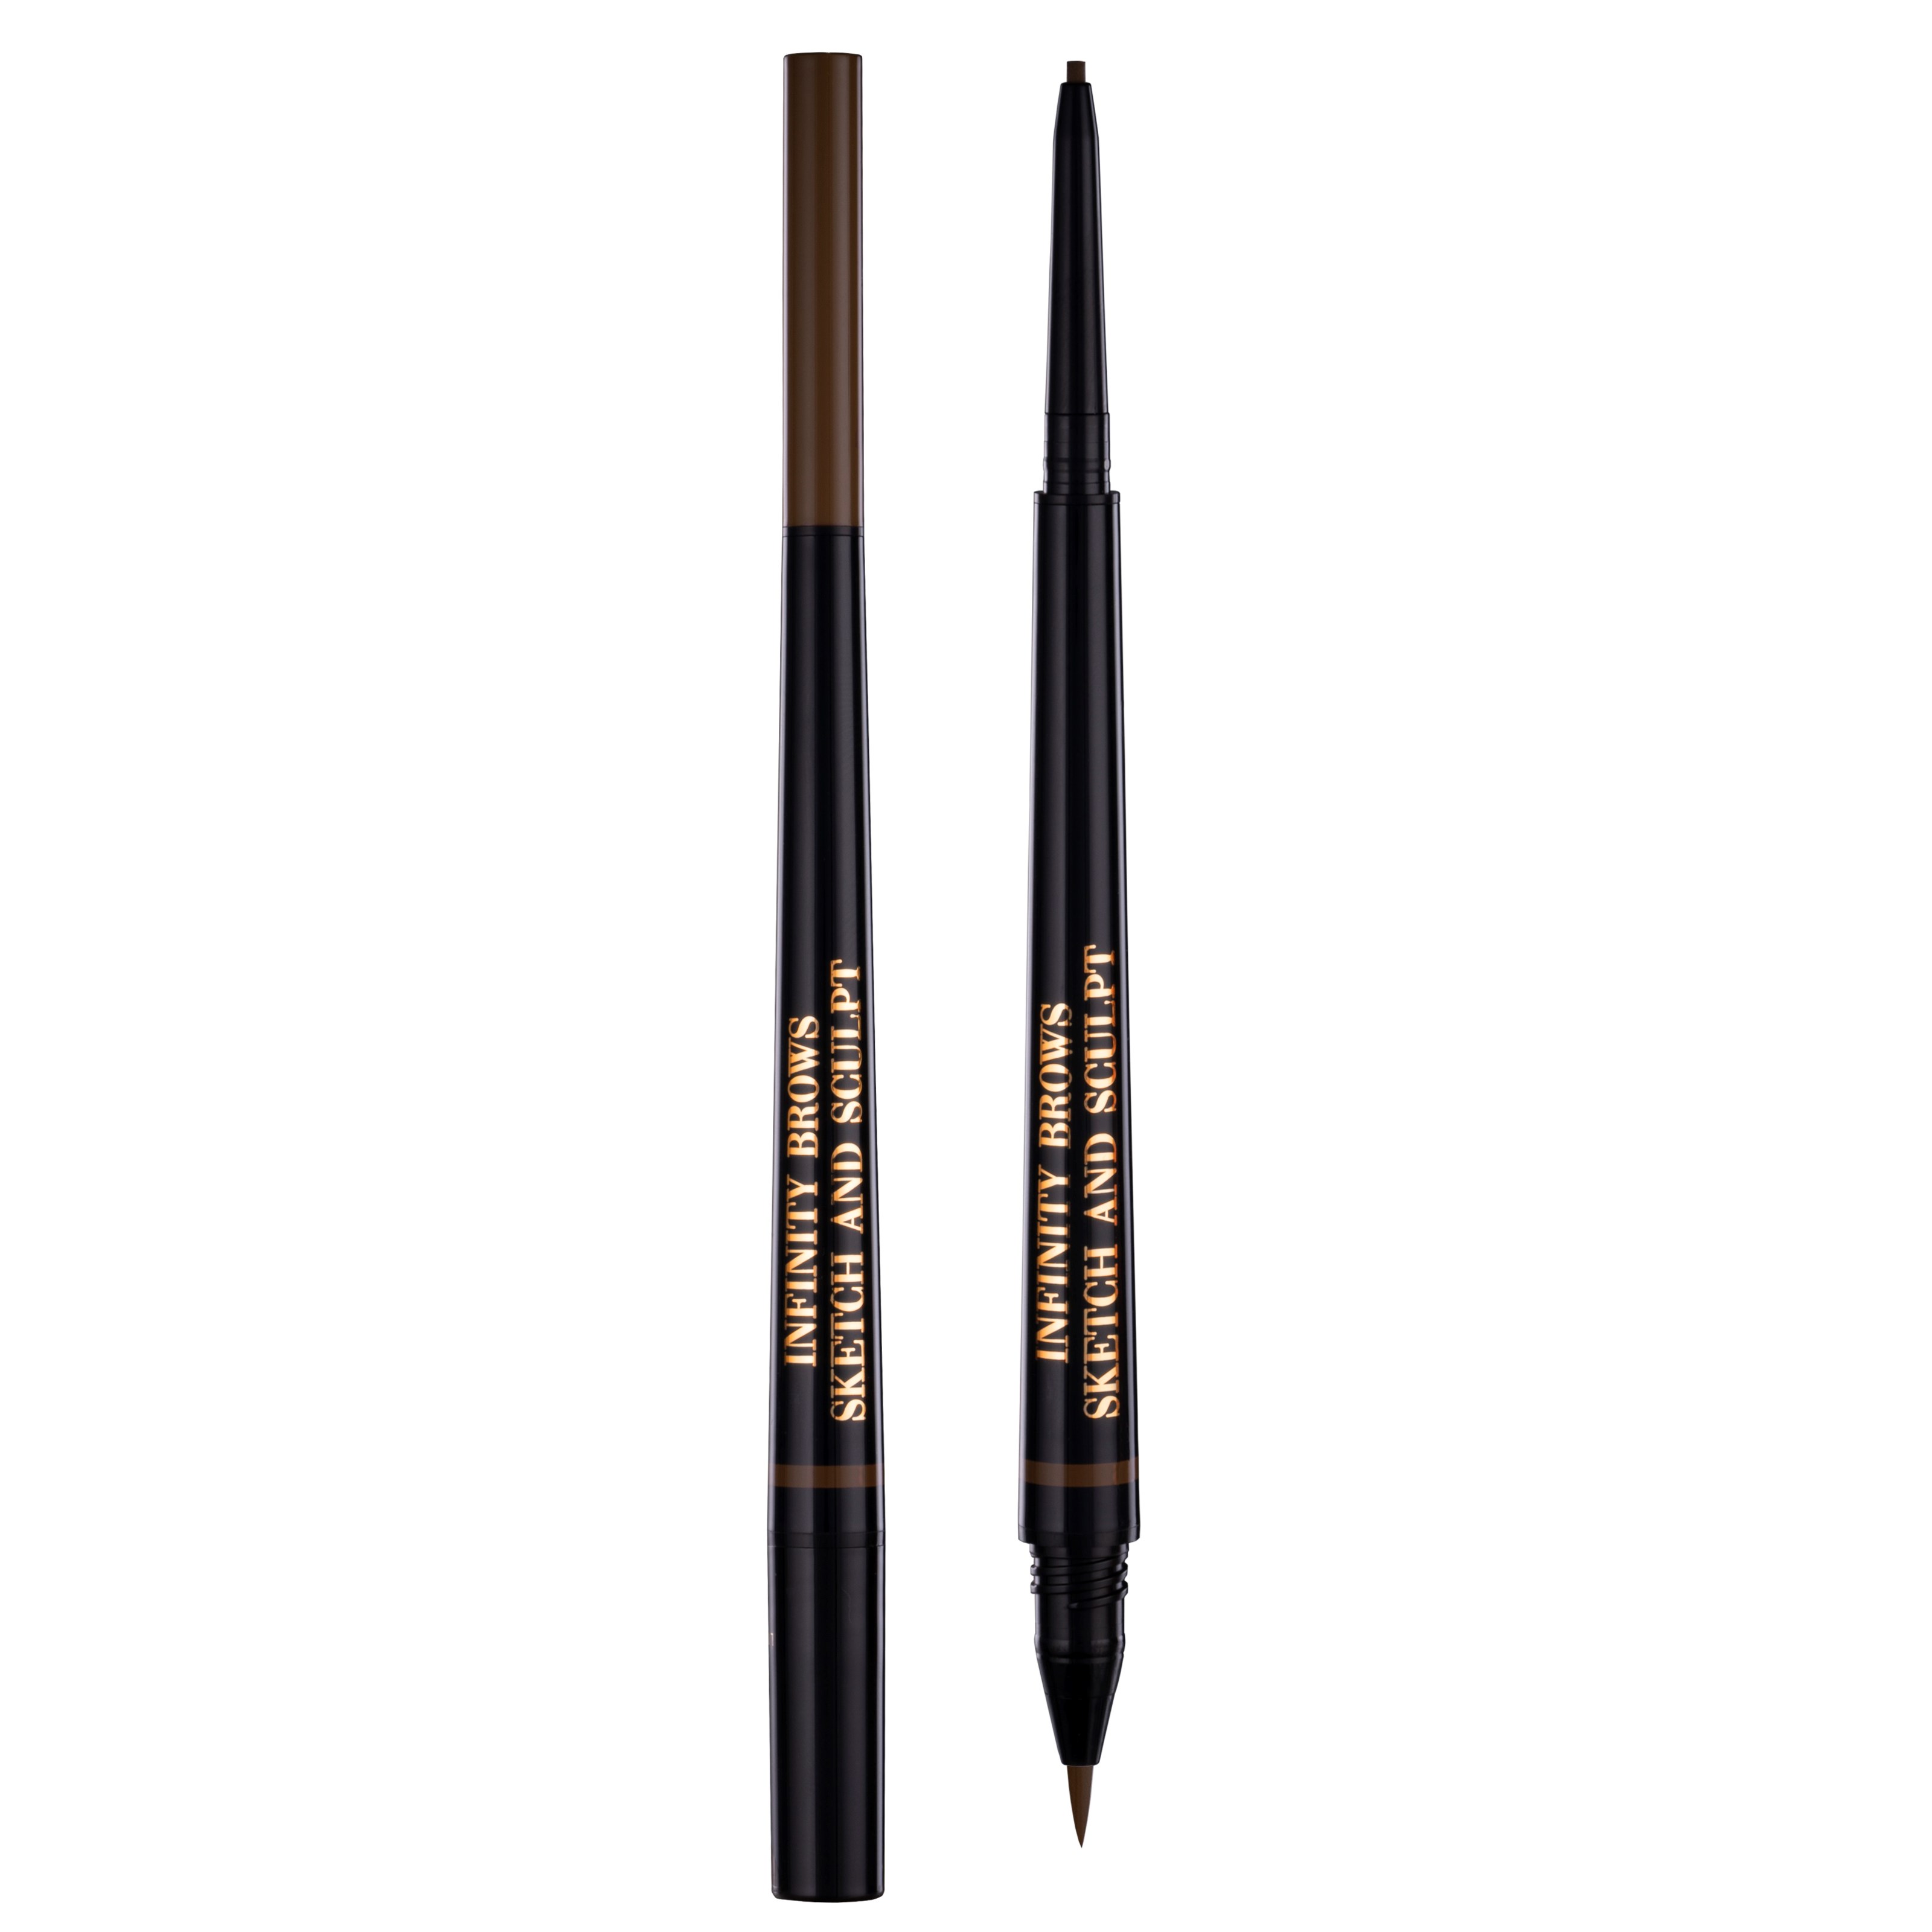 LH cosmetics Infinity Power Brows Sketch And Sculpt Liquid Liner